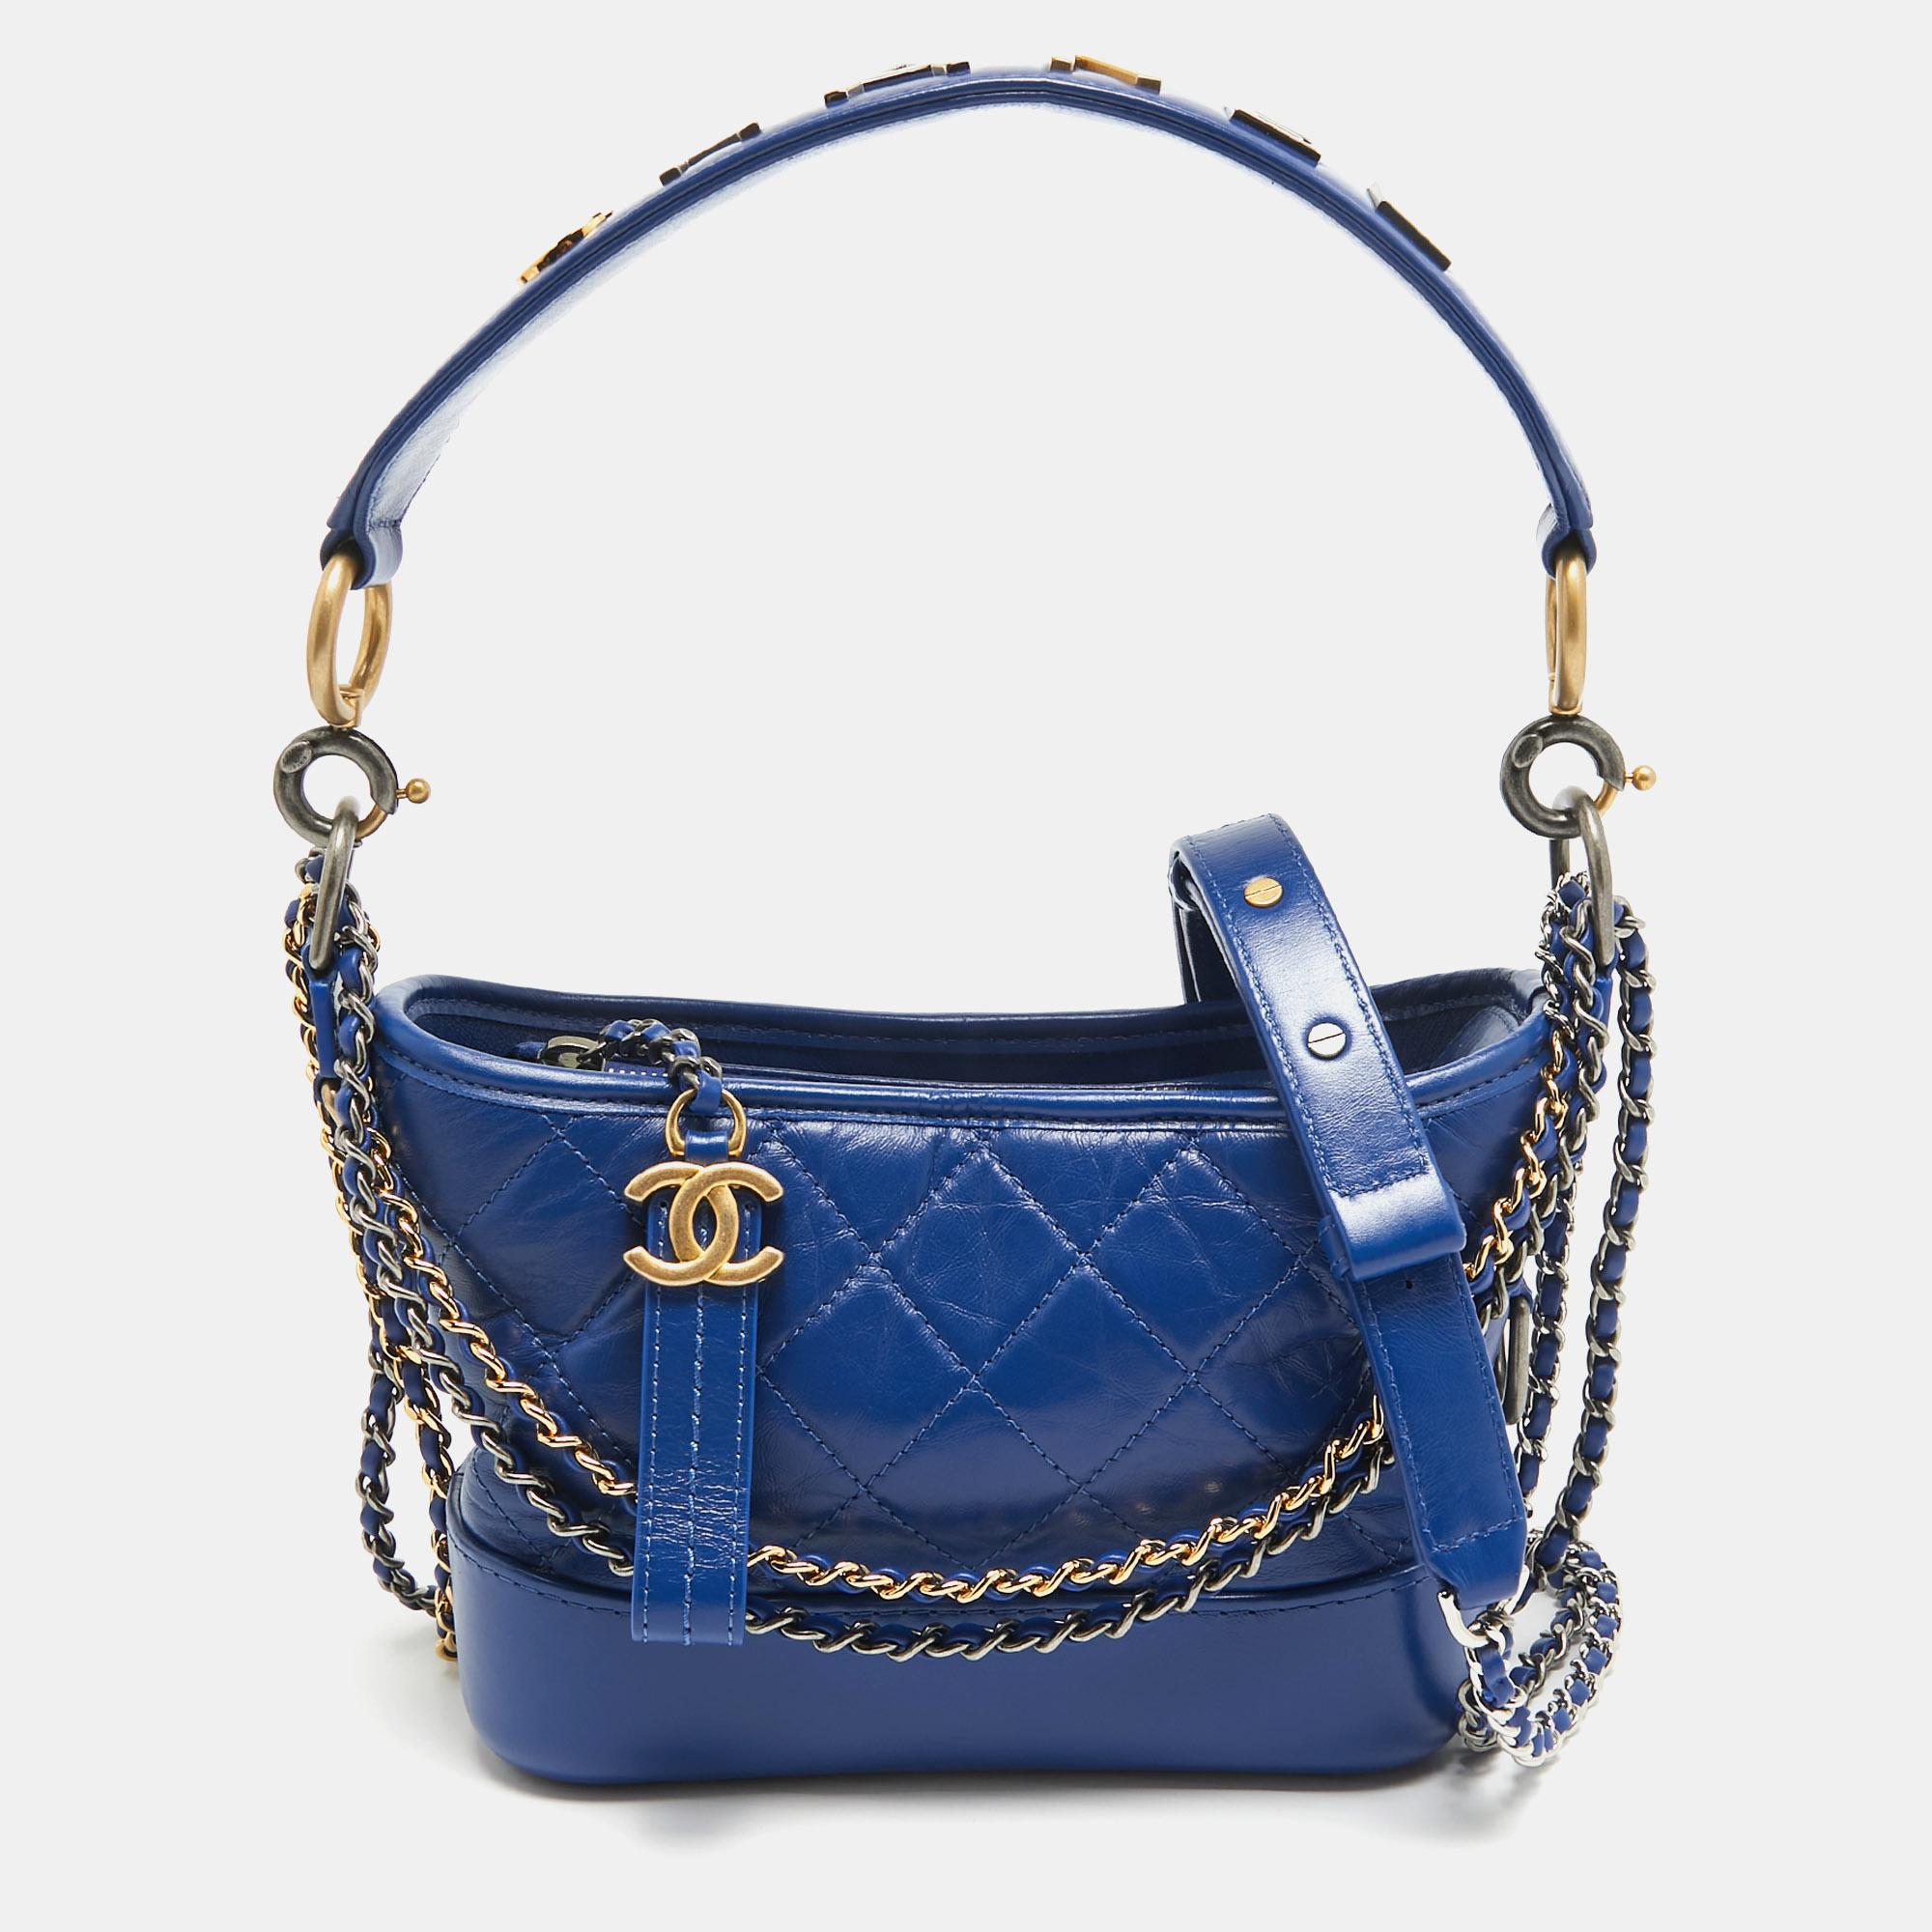 Chanel blue quilted aged leather small gabrielle hobo